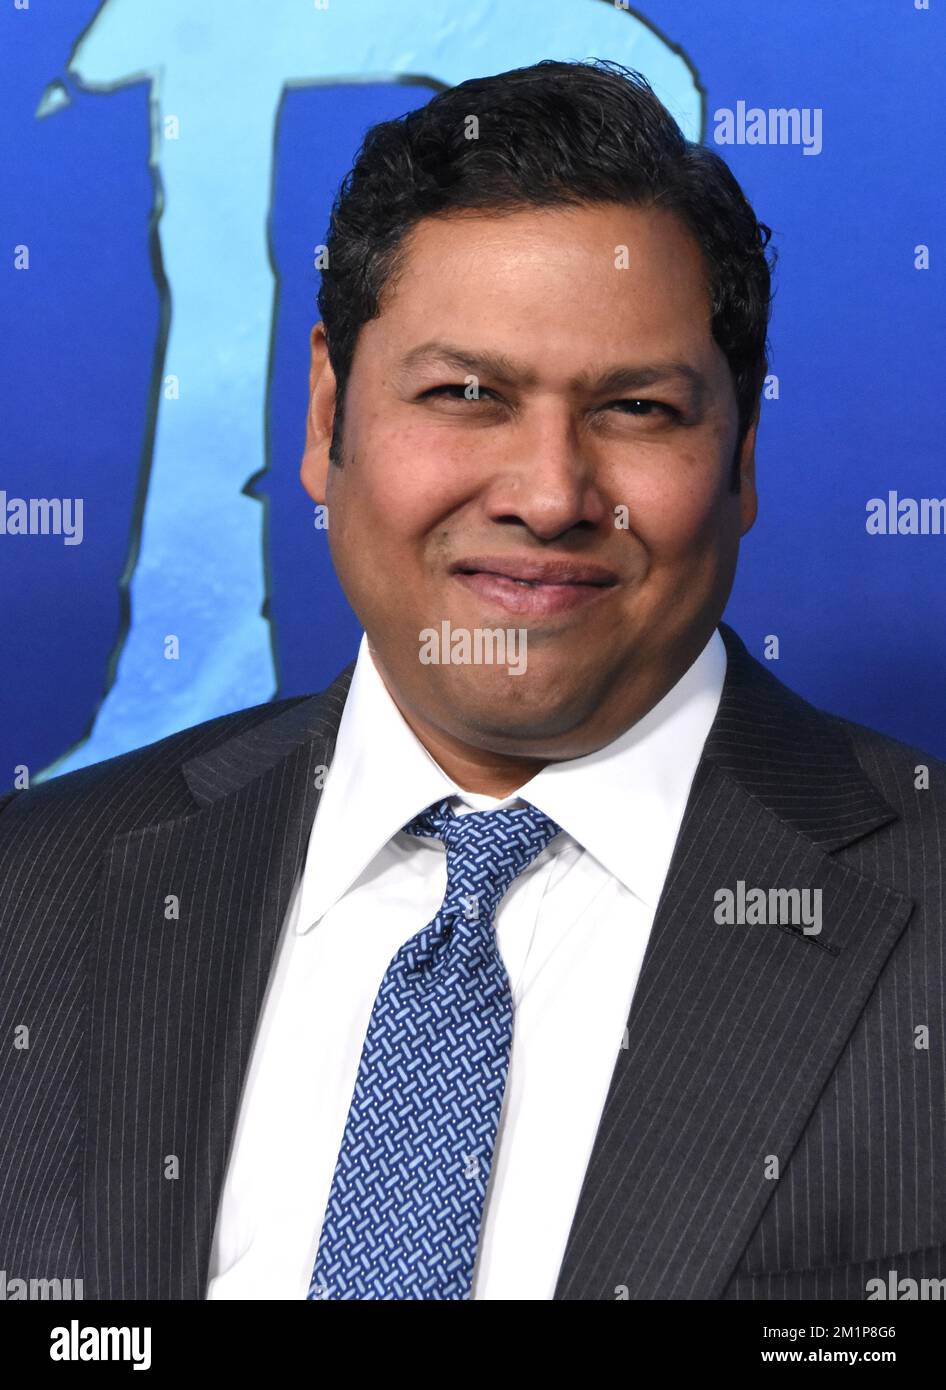 Hollywood, California, USA 12th December 2022 Actor Dileep Rao attends 20th Century Studio's 'Avatar 2: The Way of Water' U.S. Premiere at Dolby Theatre on December 12, 2022 in Hollywood, California, USA. Photo by Barry King/Alamy Live News Stock Photo